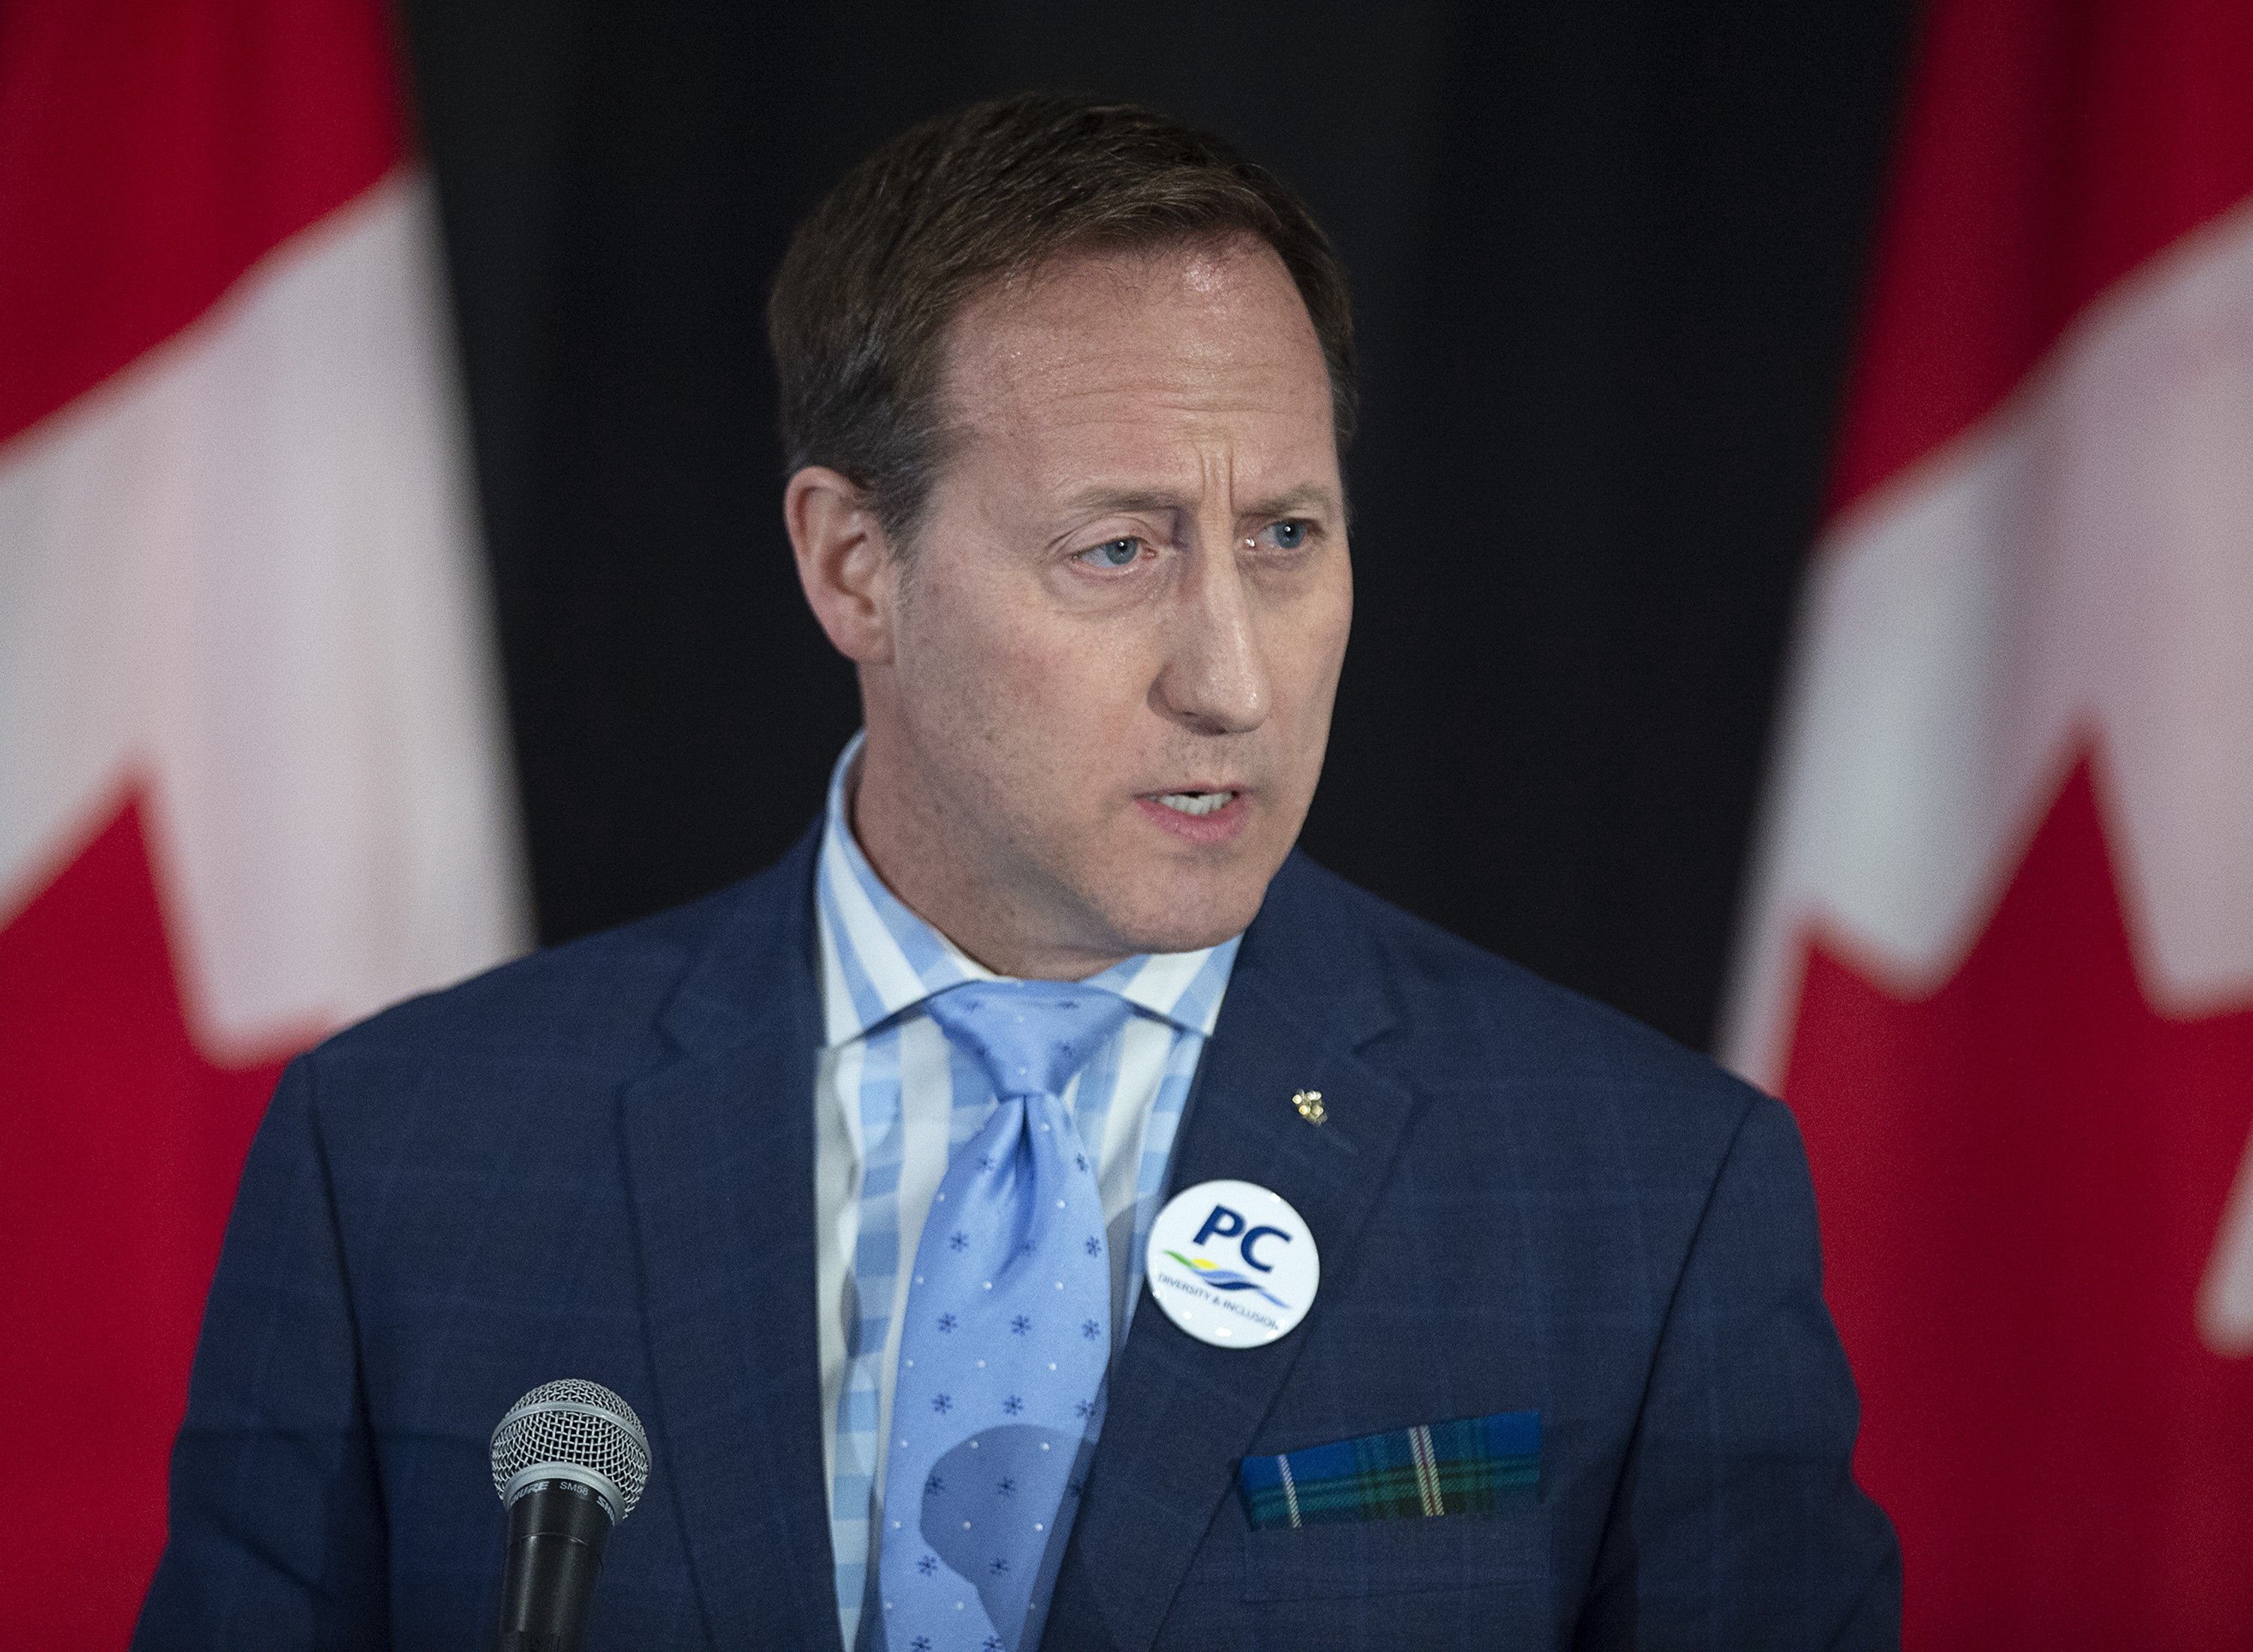 MacKay addresses the crowd at a federal Conservative leadership forum during the annual general meeting of the Nova Scotia Progressive Conservative party in Halifax on Feb. 8, 2020 (Andrew Vaughan/CP)